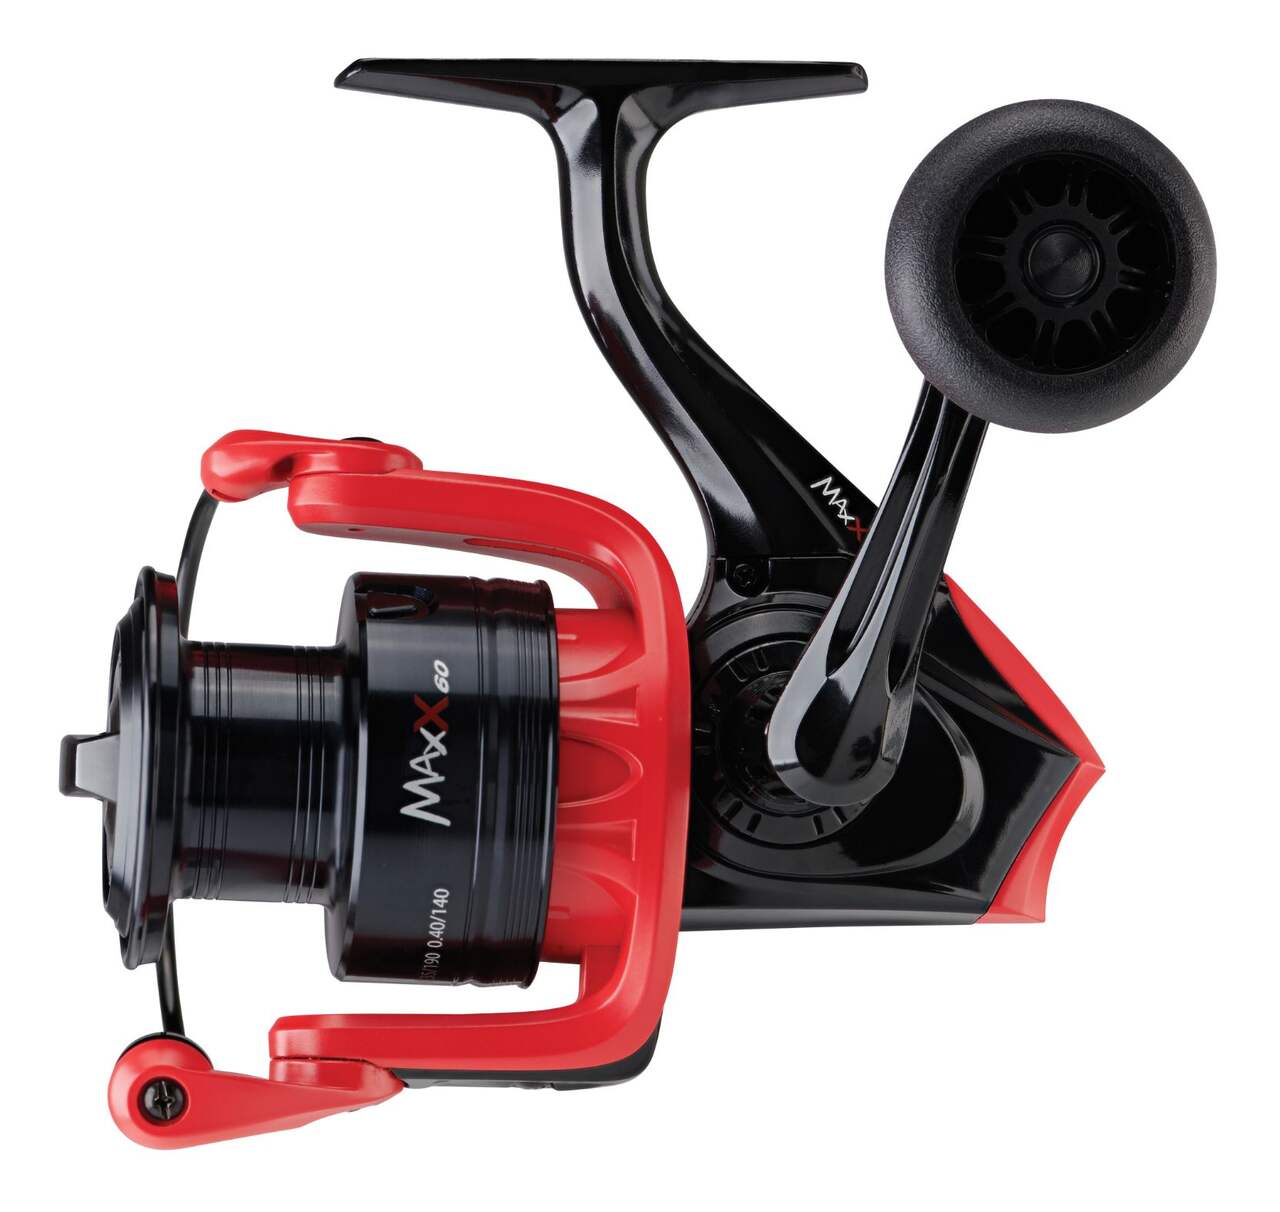 Spinning reel Abu Garcia Elite Max - Nootica - Water addicts, like you!